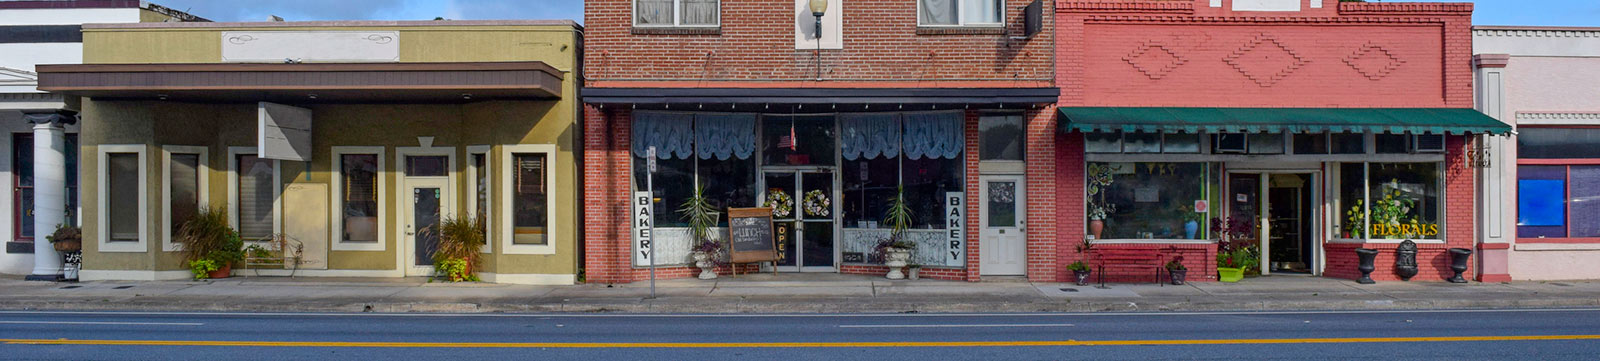 small business store fronts